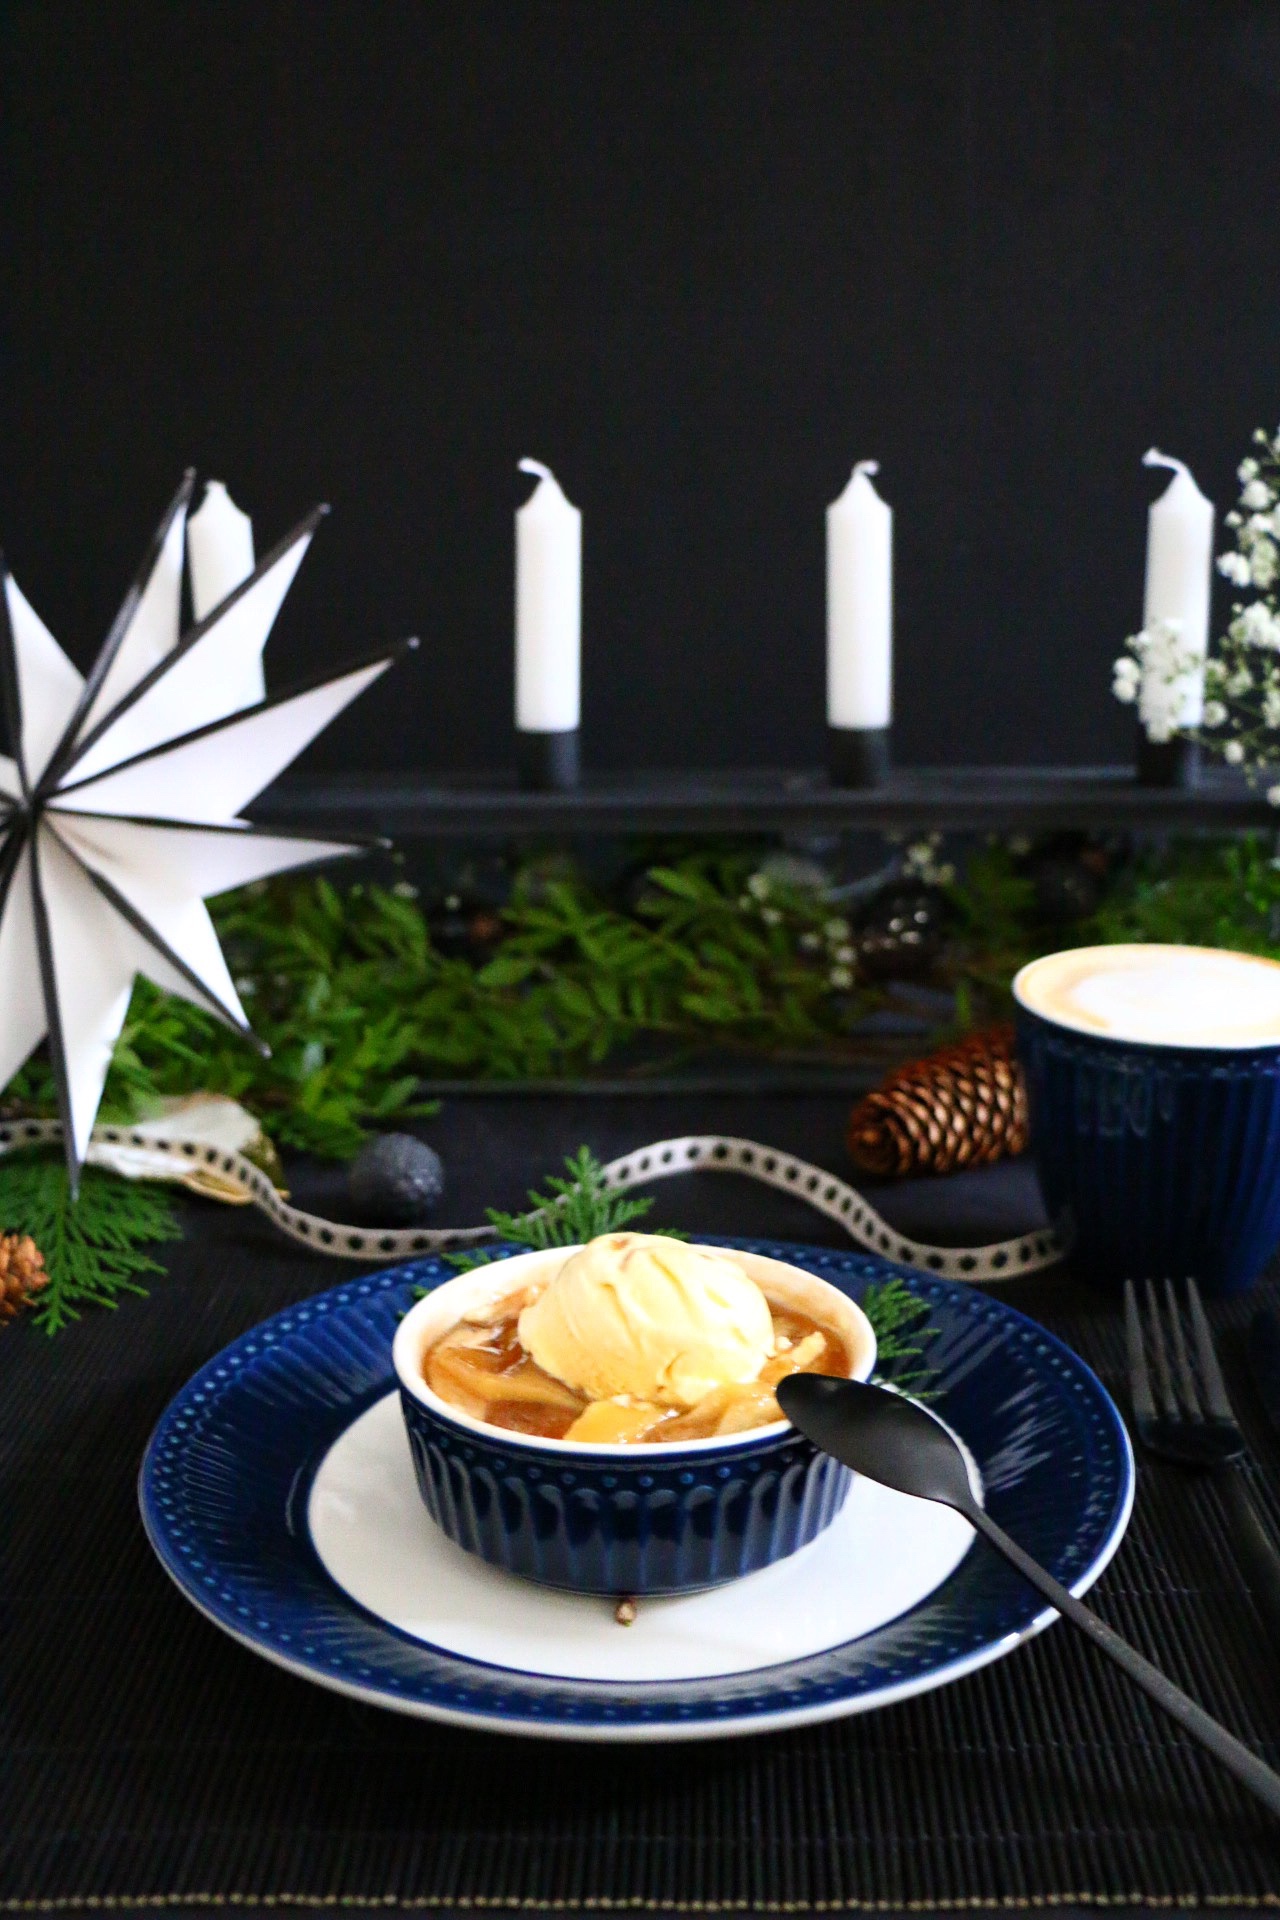 Getting ready for Xmas - Danish Table Setting by eat blog love